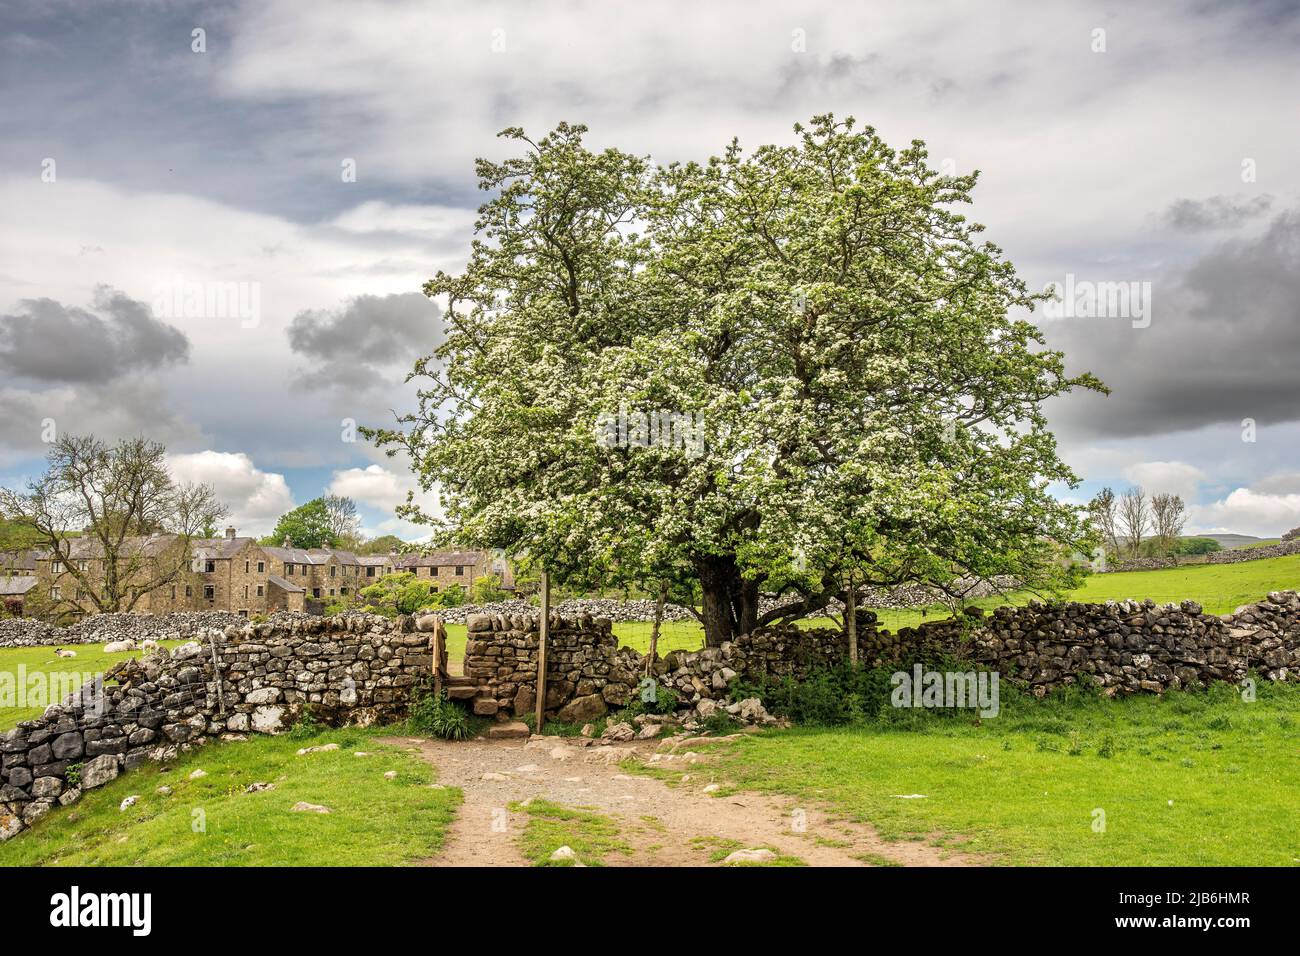 The walk along the public footpaths Dales Way alongside The River Wharfe, Grassington, Linton, Burnsall showing sheep and Hawthorn blossom Stock Photo